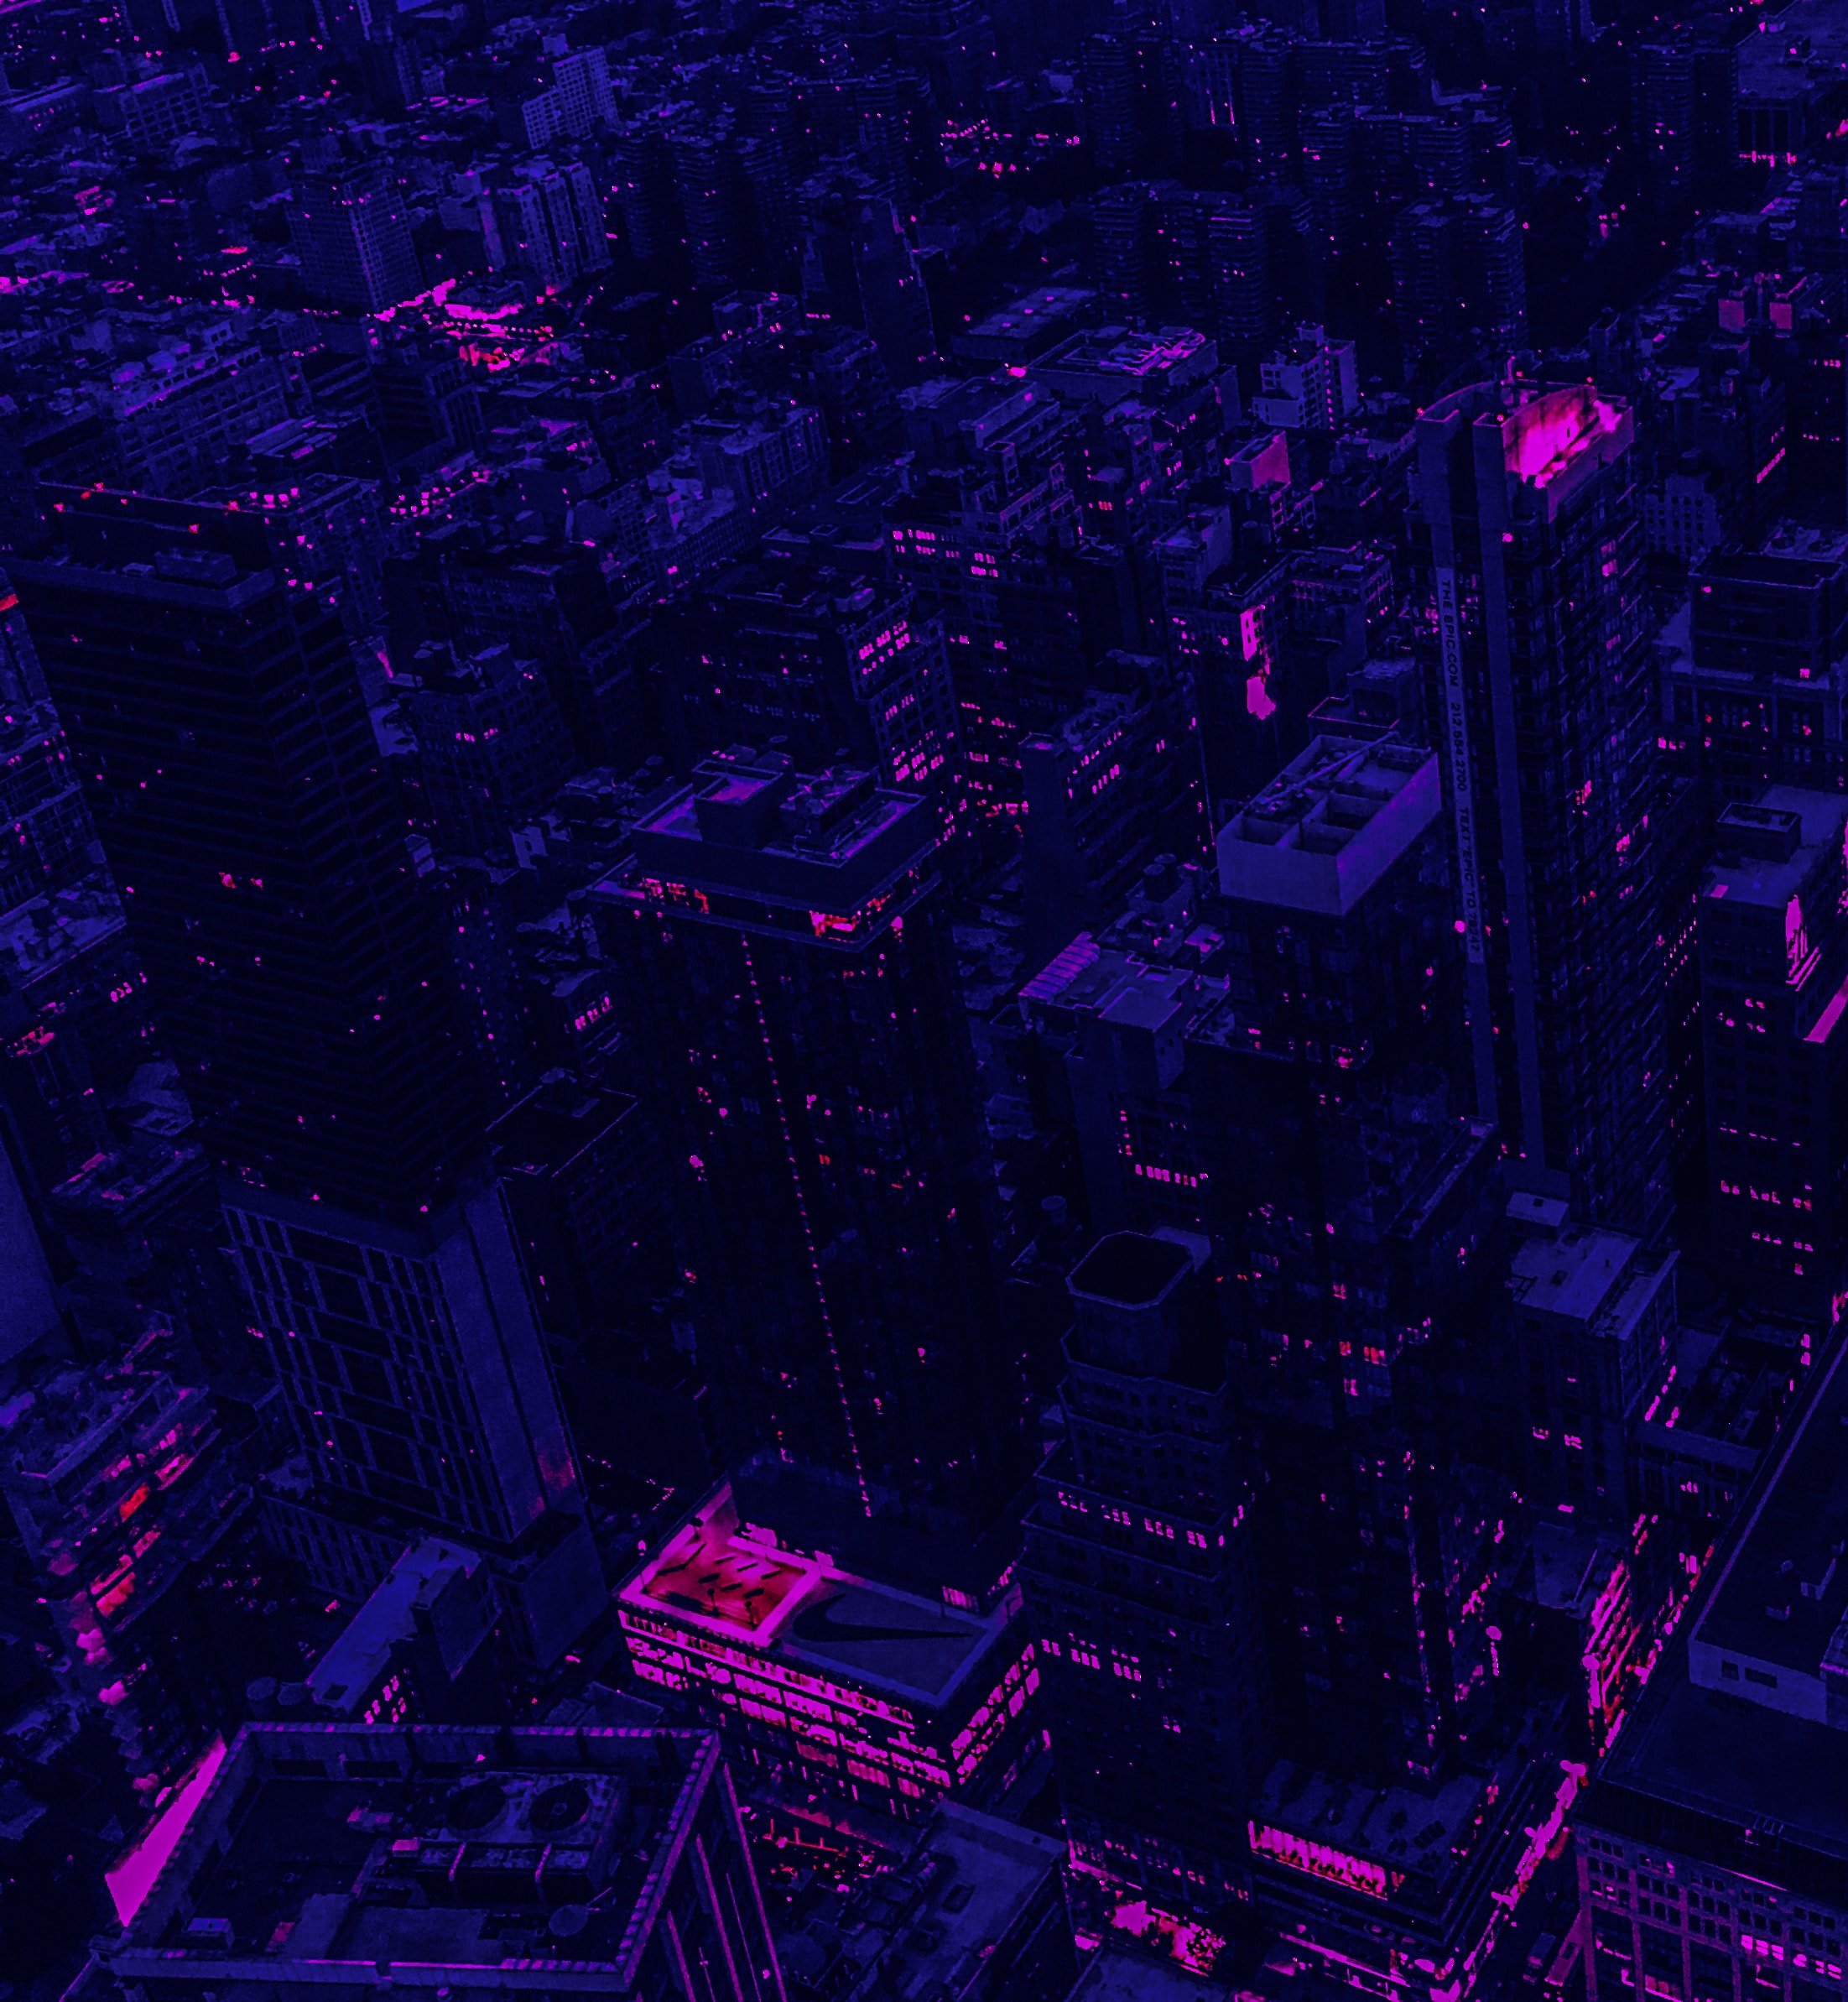 purple, violet, dark, view from above, city, building High Definition image